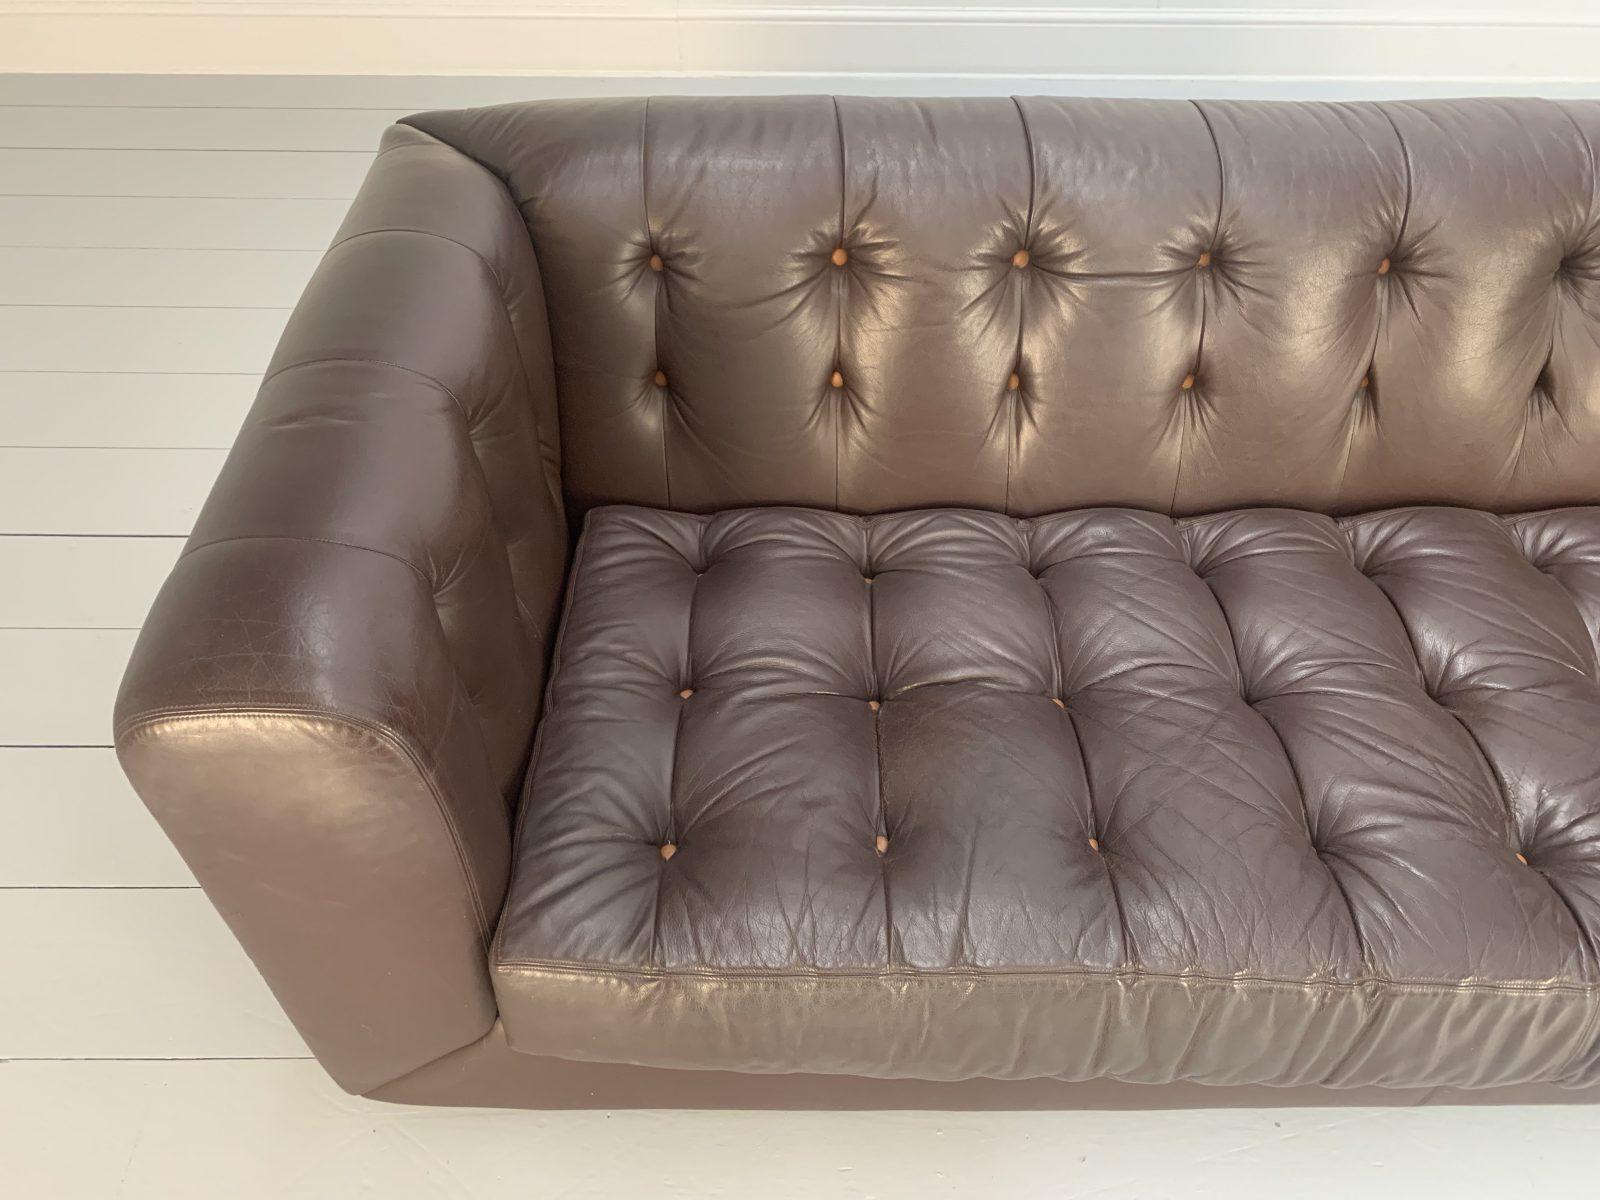 David Linley “Yoxford” Chesterfield 3-Seat Sofa in Brown Leather For Sale 6